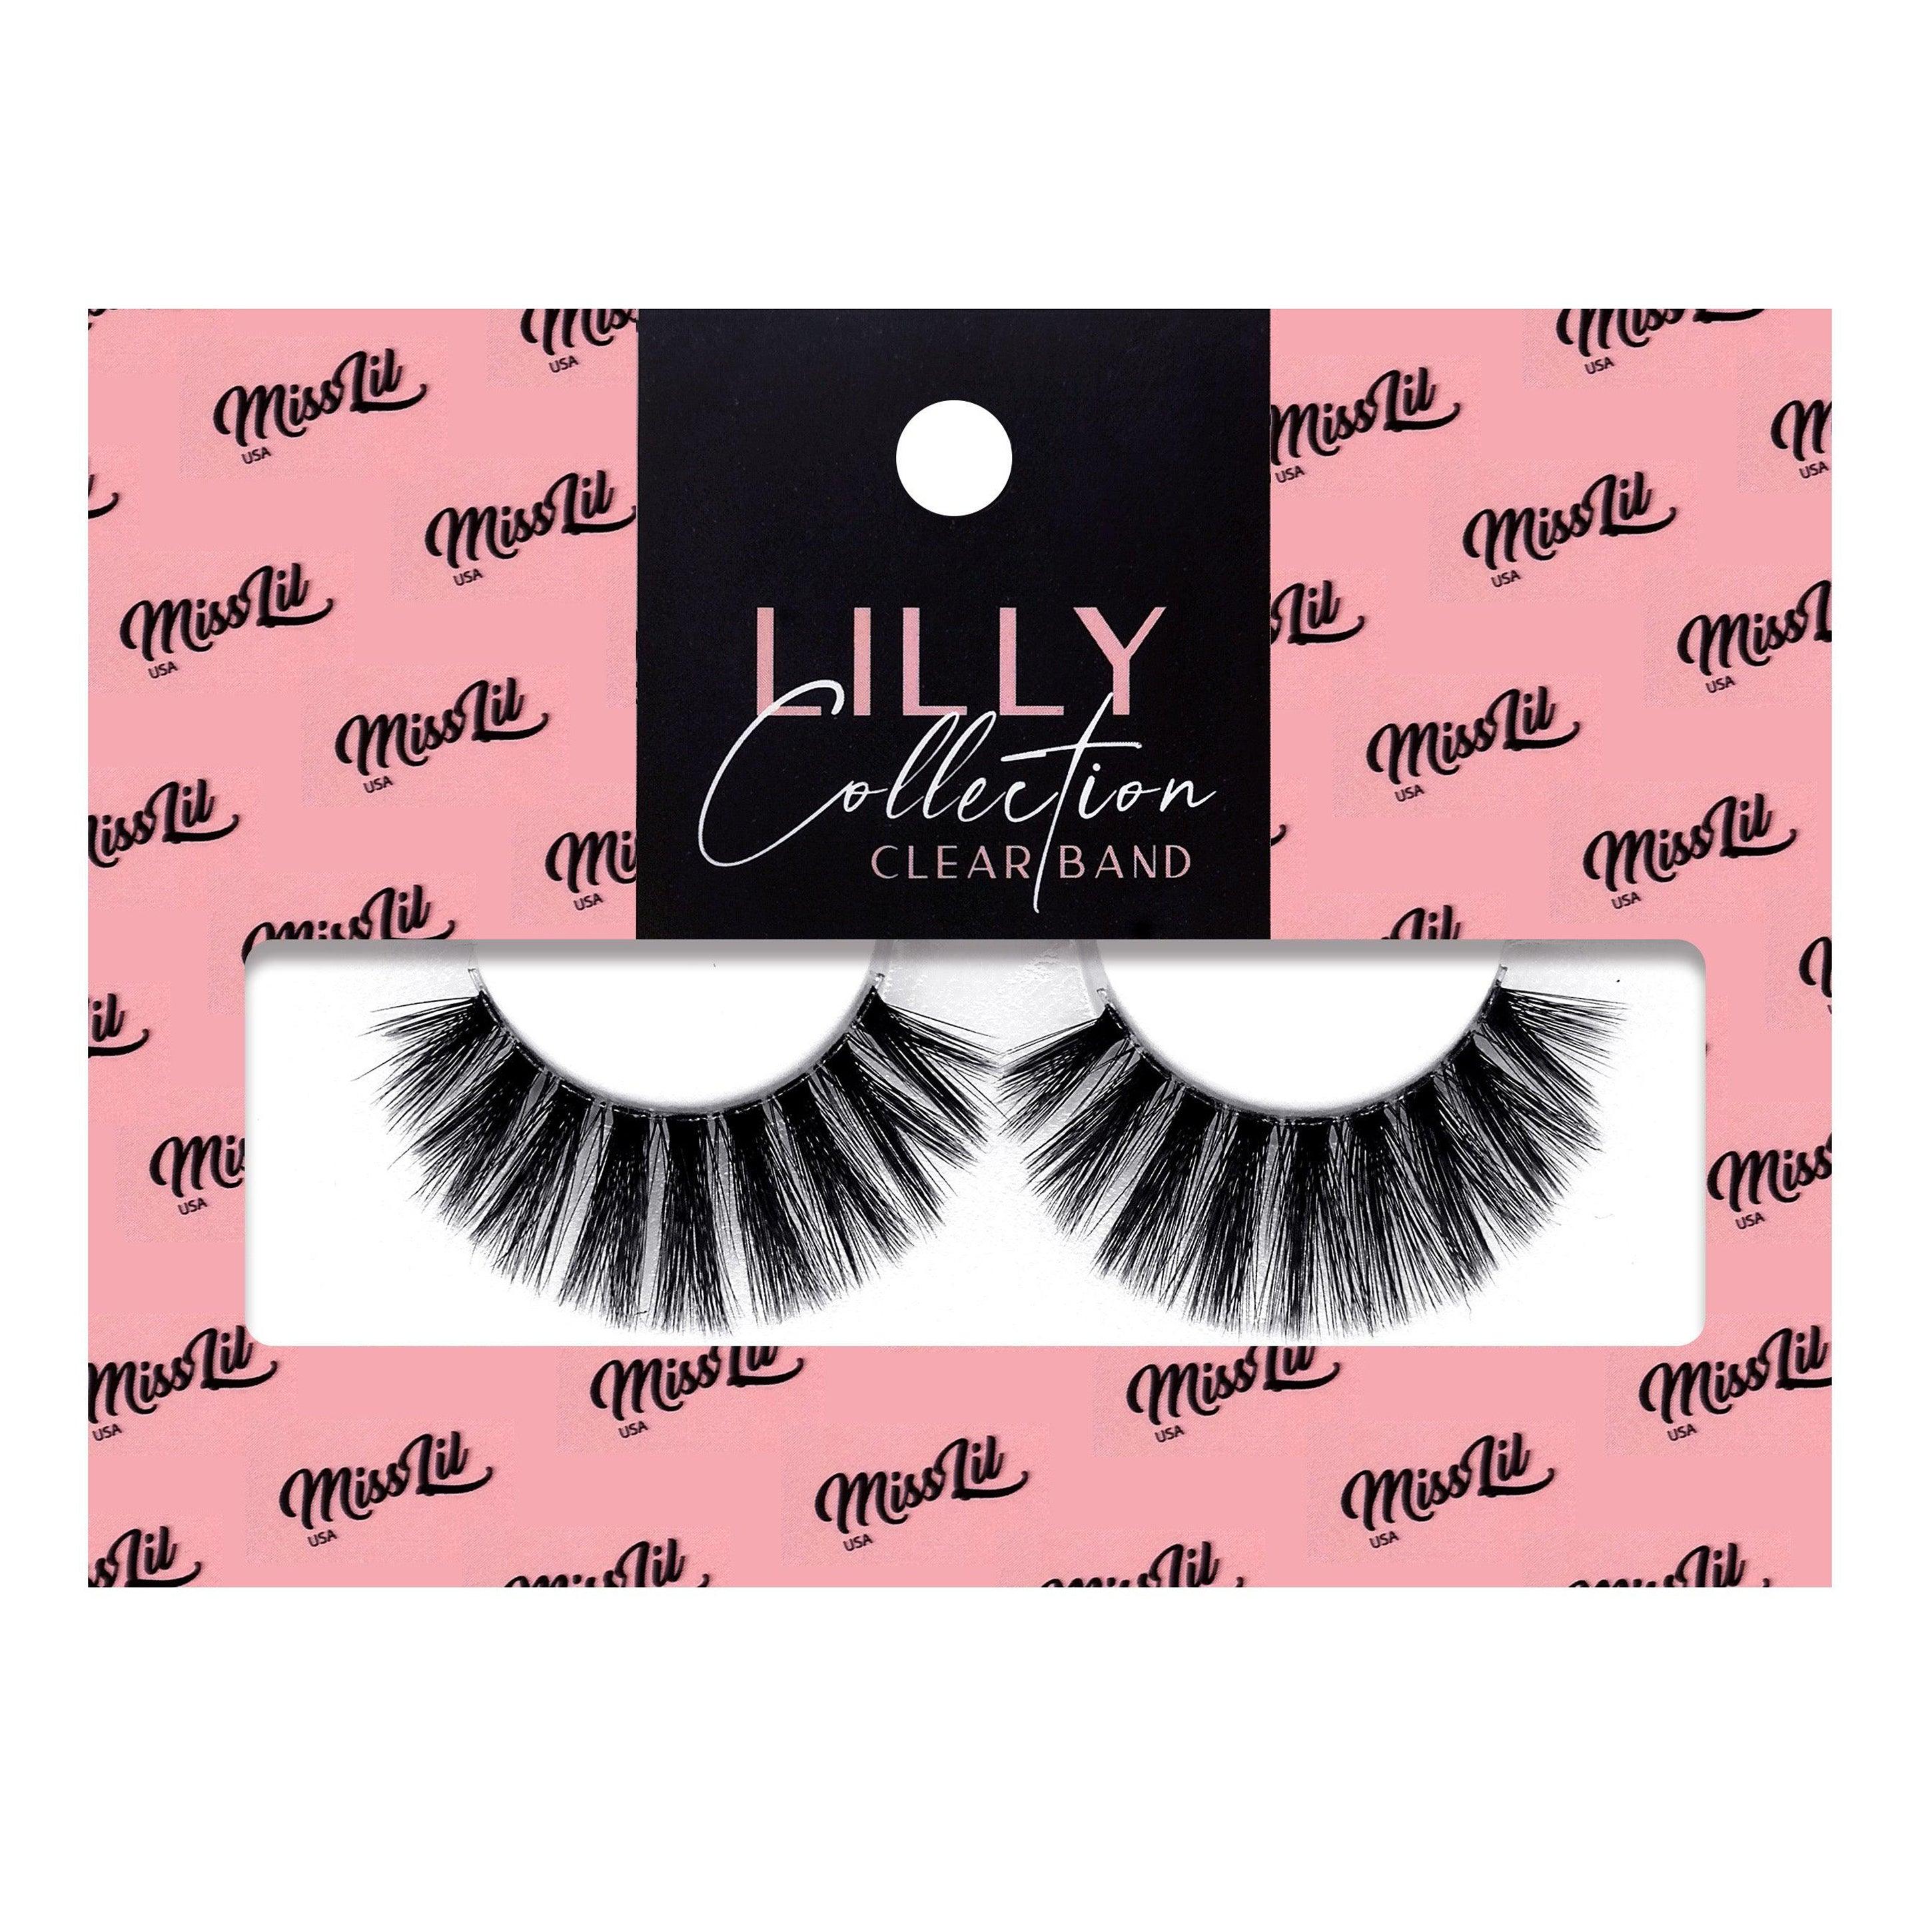 1-Pair Lashes-Lilly Collection #1 (Pack of 12) - Miss Lil USA Wholesale